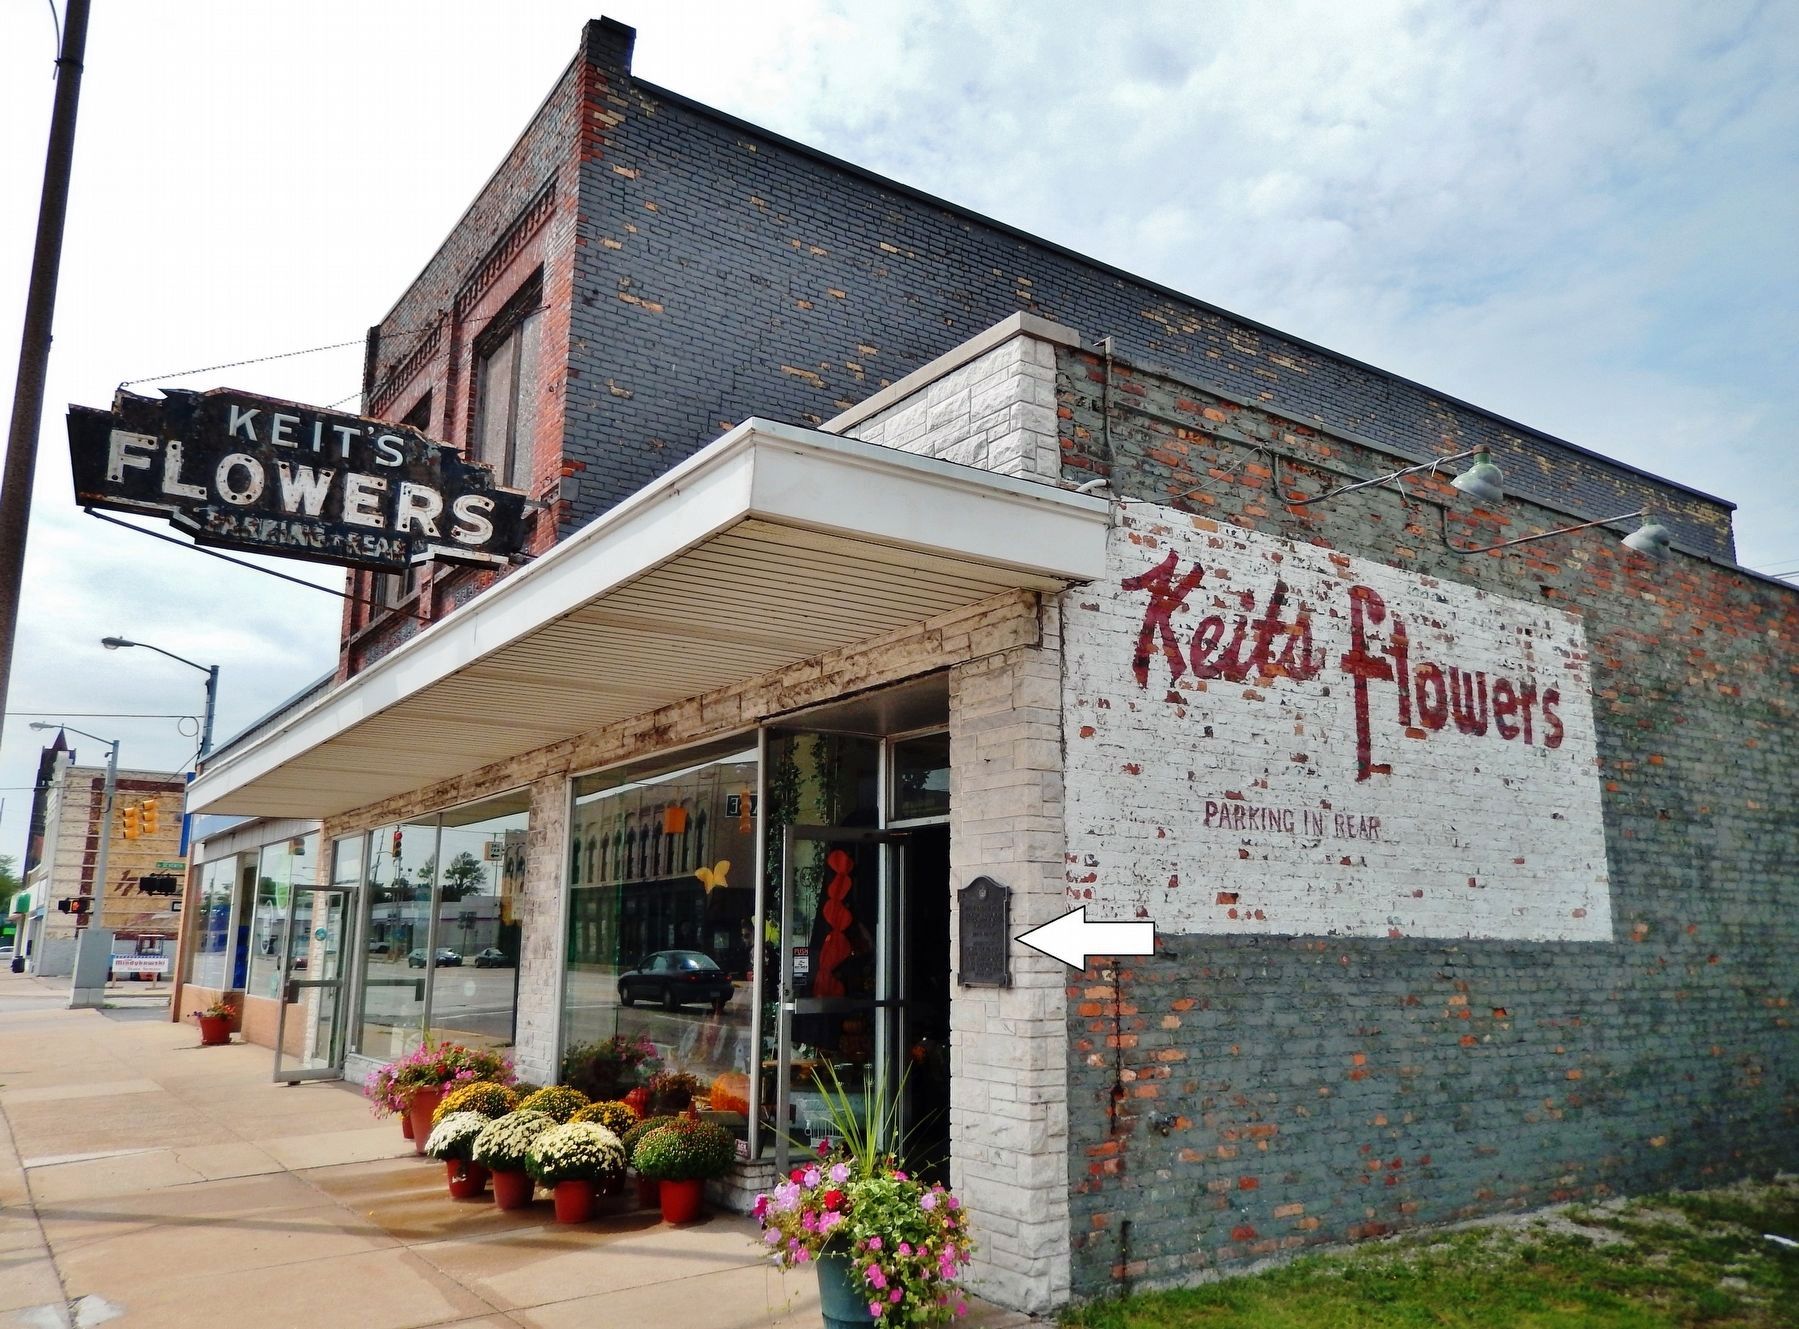 Keit's Flowers (<i>northeast corner view; marker visible at corner of building</i>) image. Click for full size.